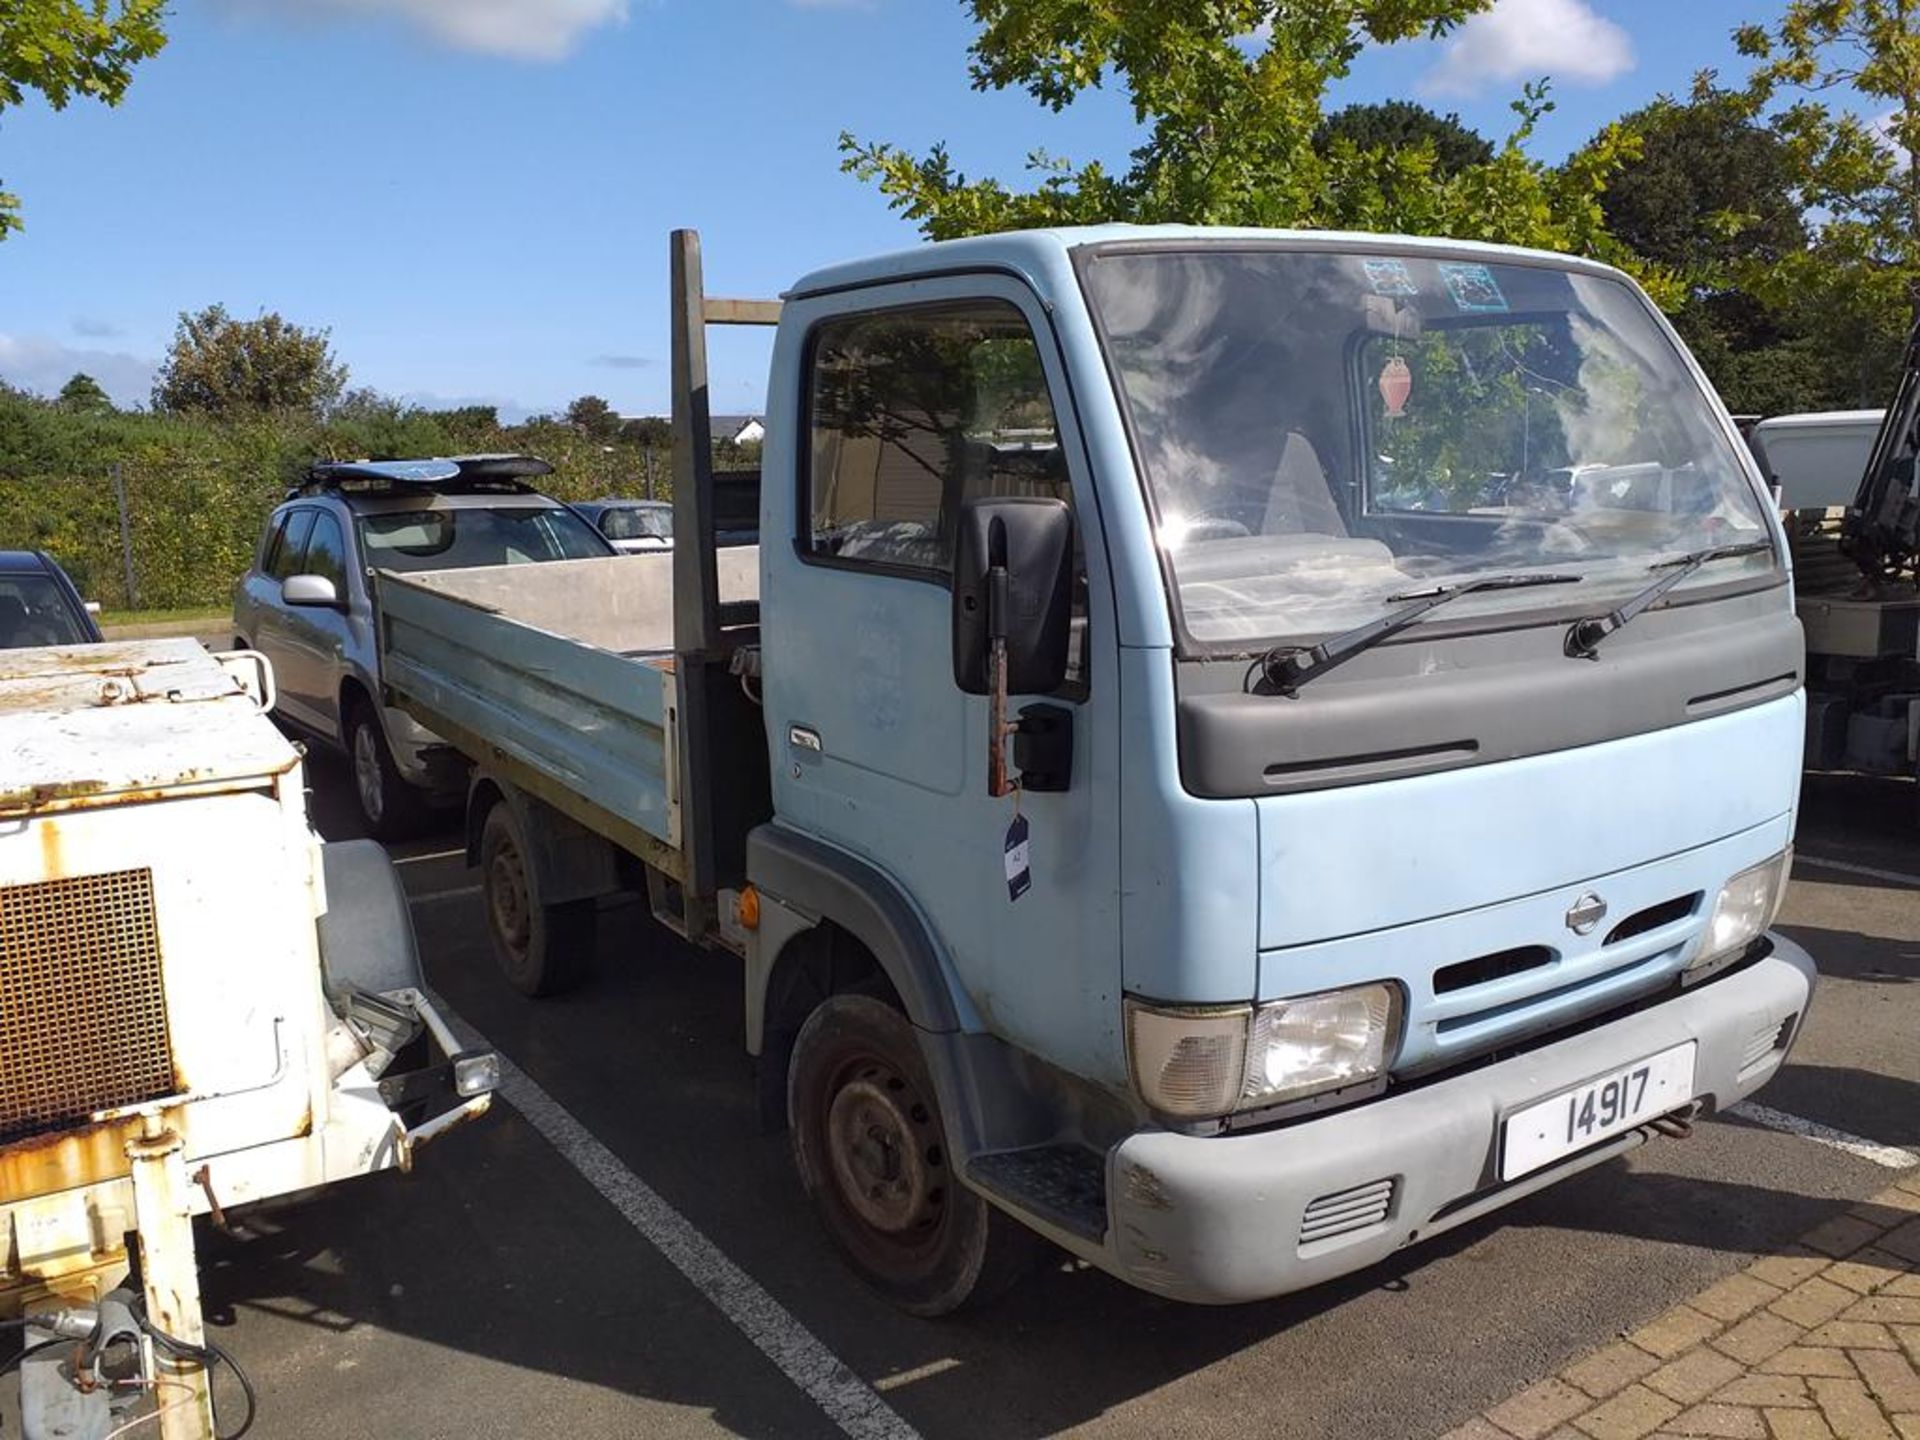 Nissan Cabstar Tipping Pick-Up 14917 - Image 2 of 5